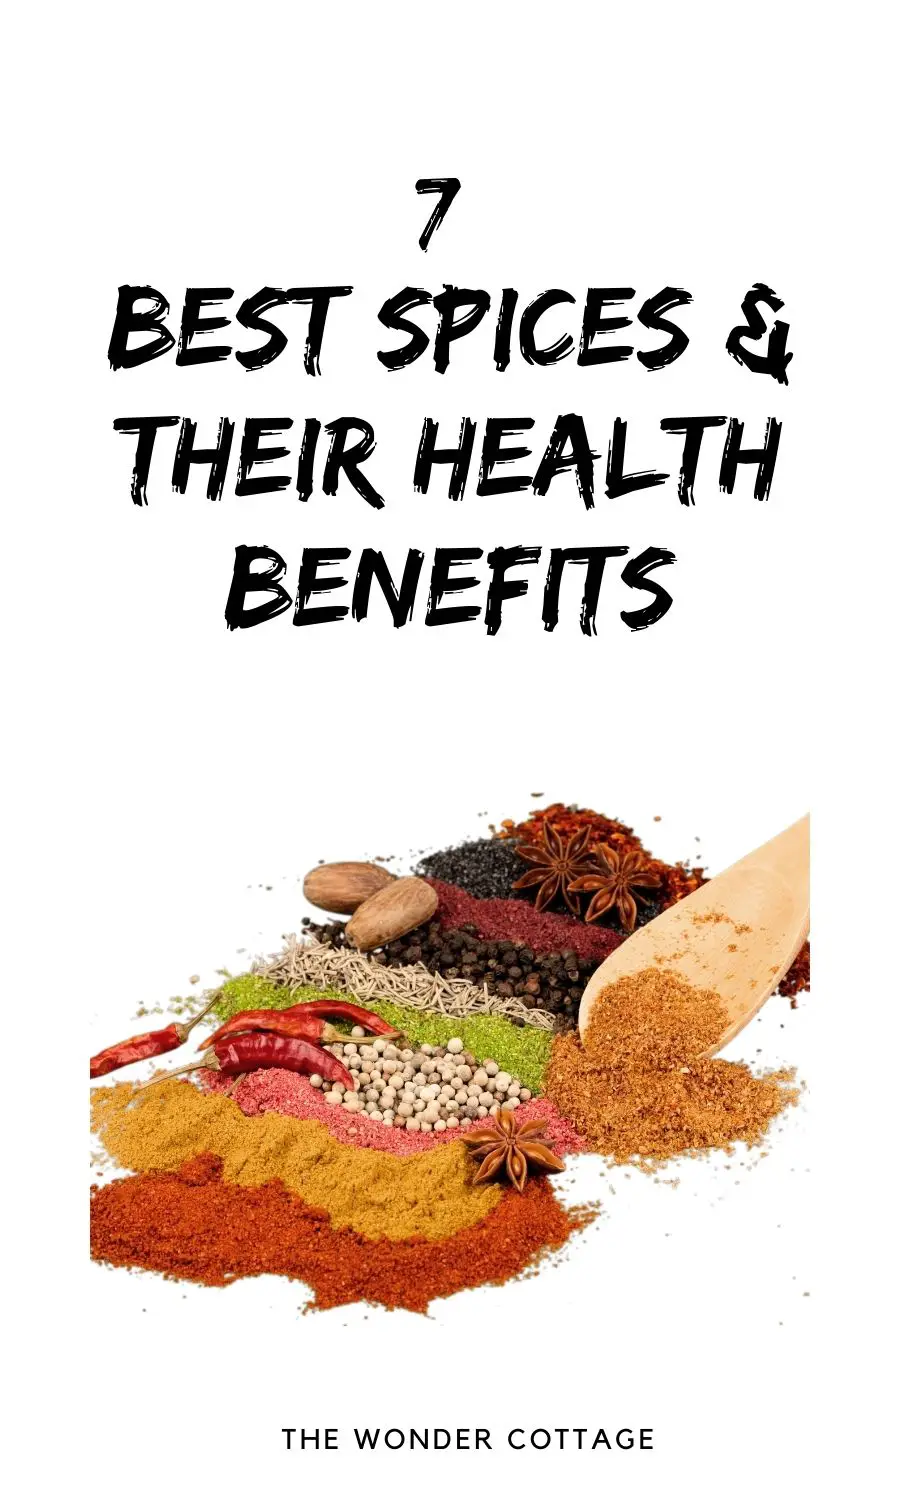 Best spices and their health benefits